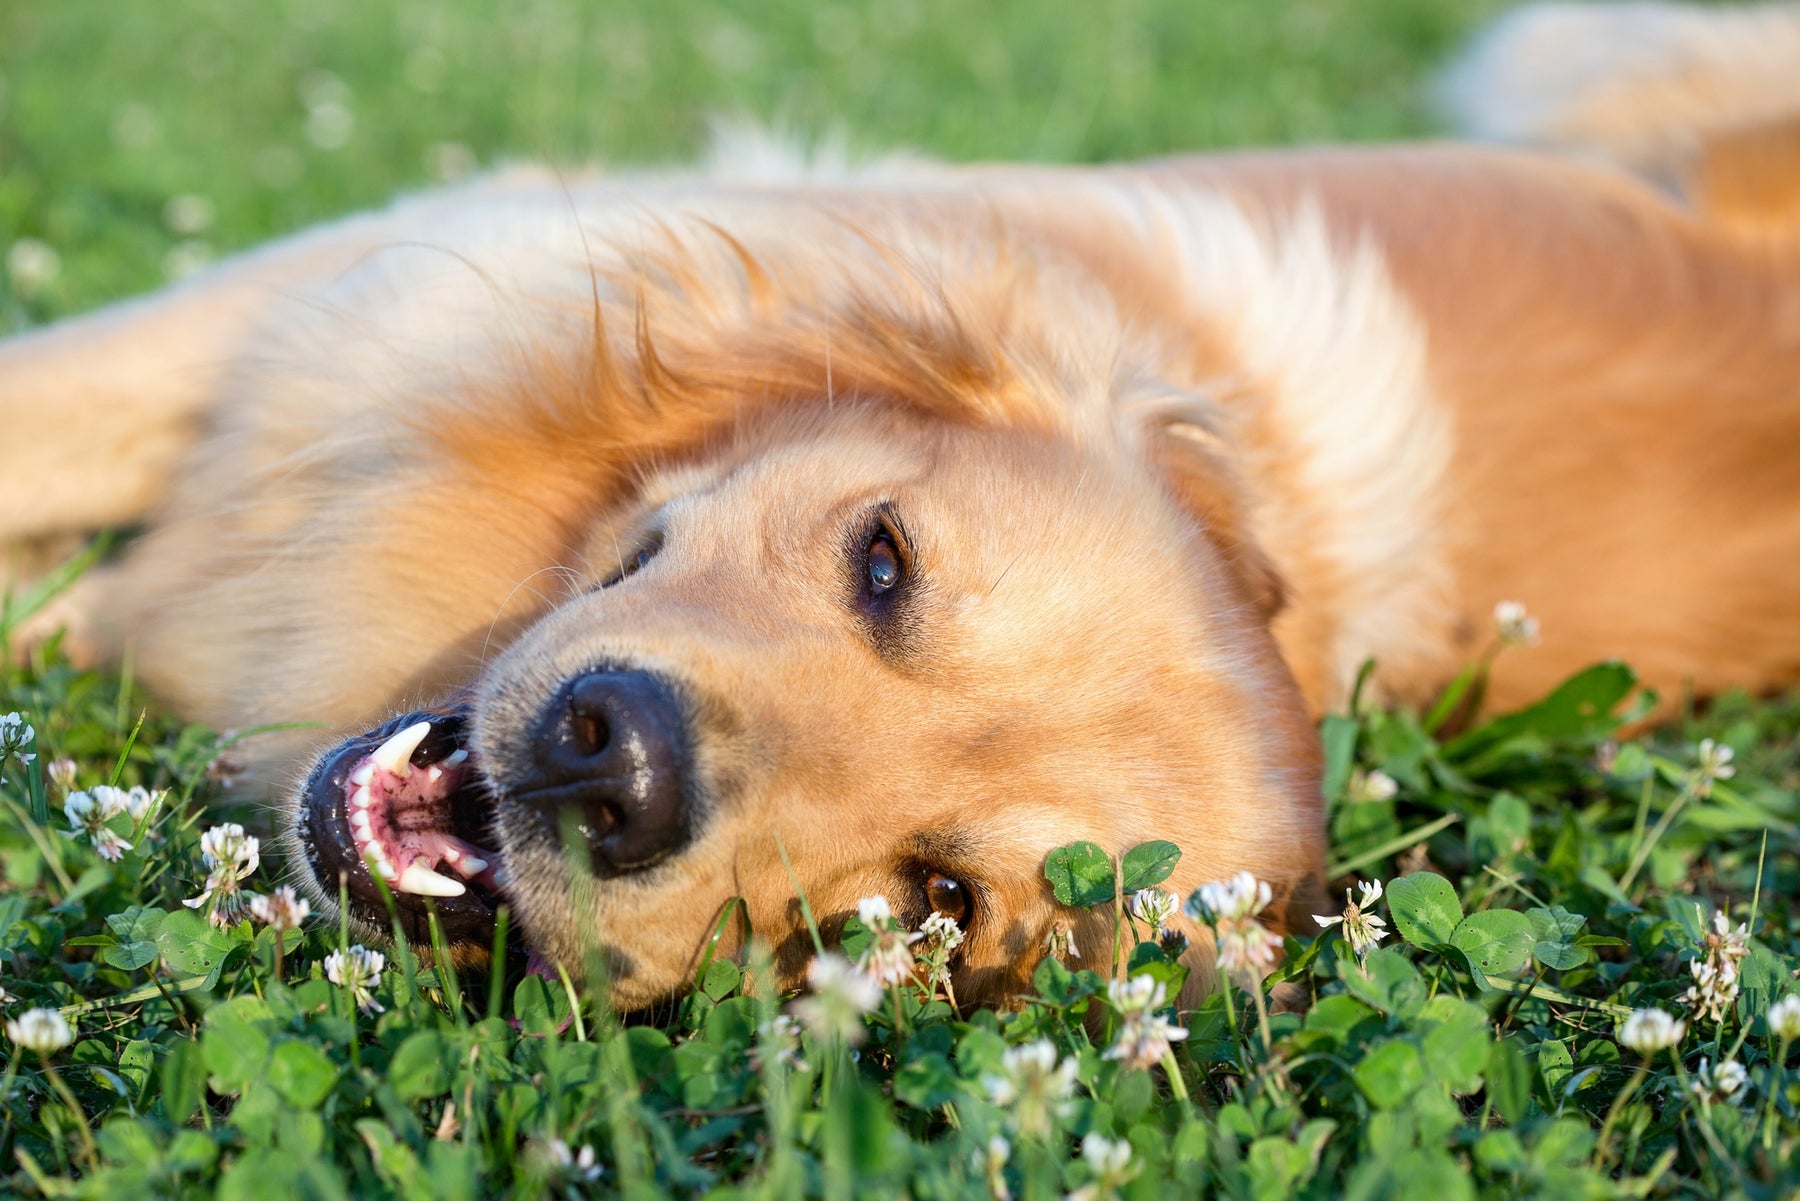 Why dogs eat grass